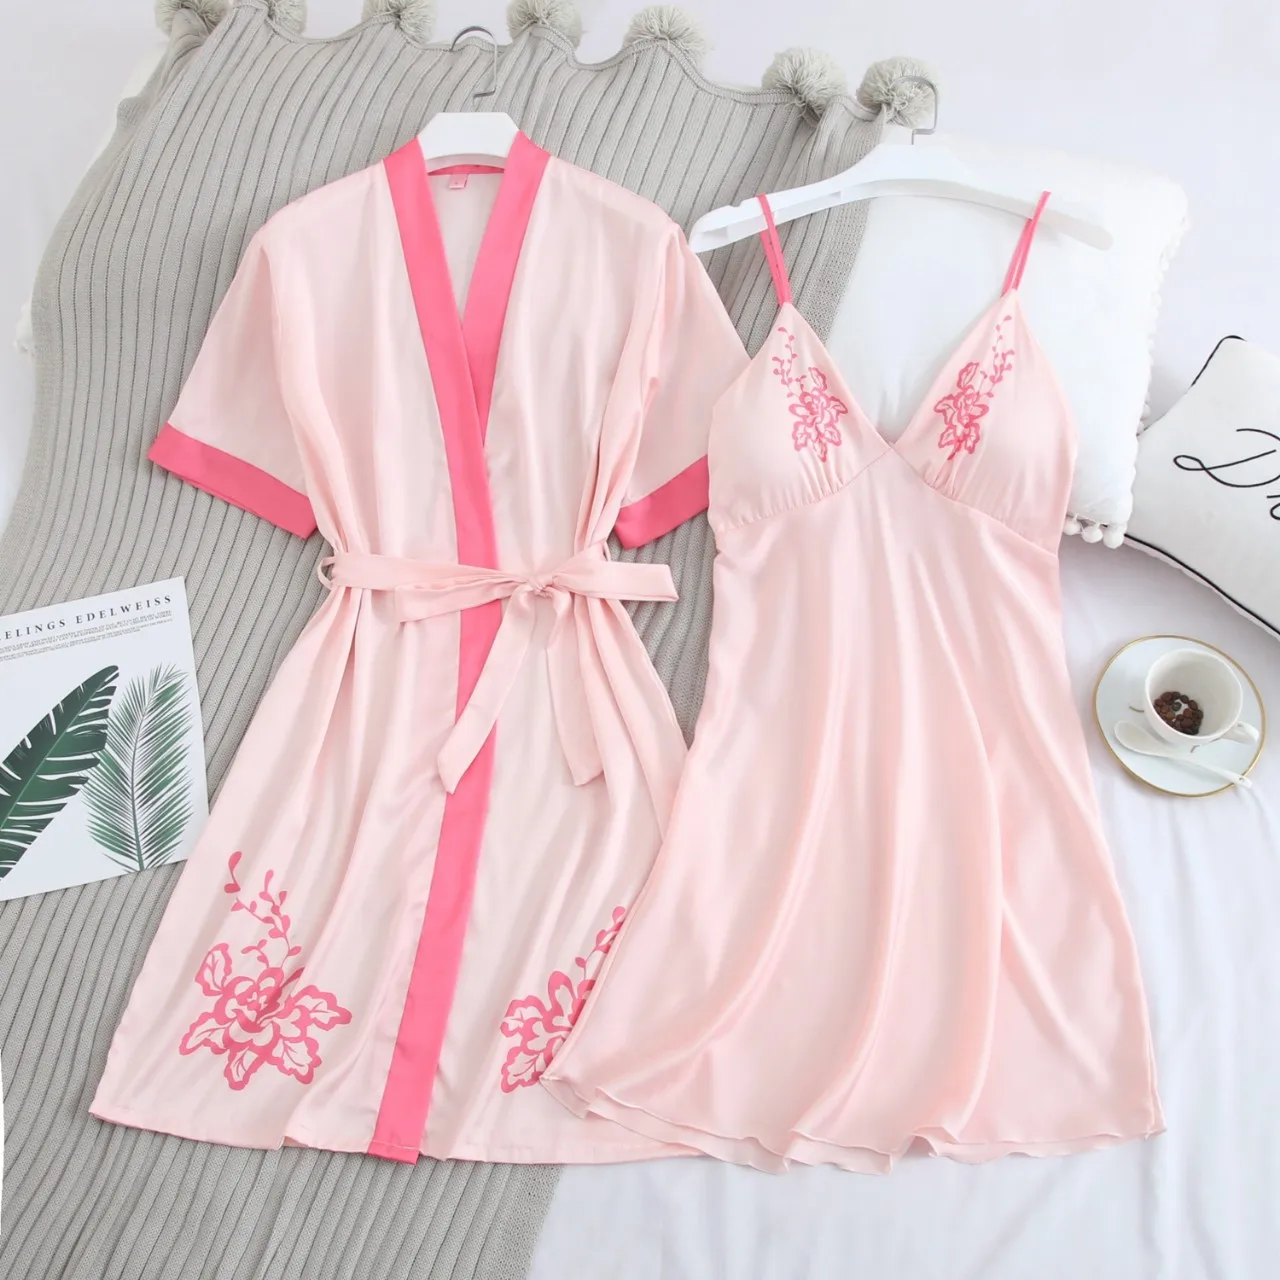 

Women Robe Gown Sets Sexy Lace Bride Lingerie Nightgown V-Neck Rayon Nightdress Summer Kimono Bathrobe Casual Home Dressing